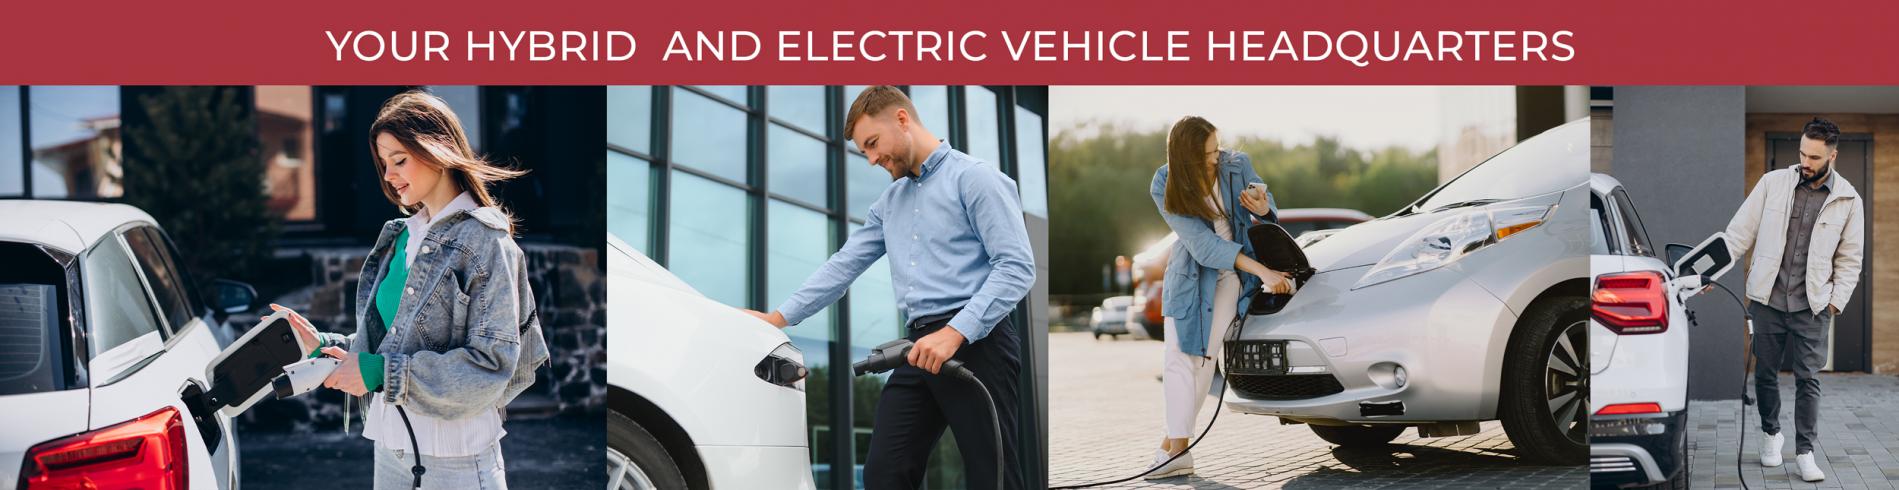 Your Hybrid and Electric Vehicle Headquarters